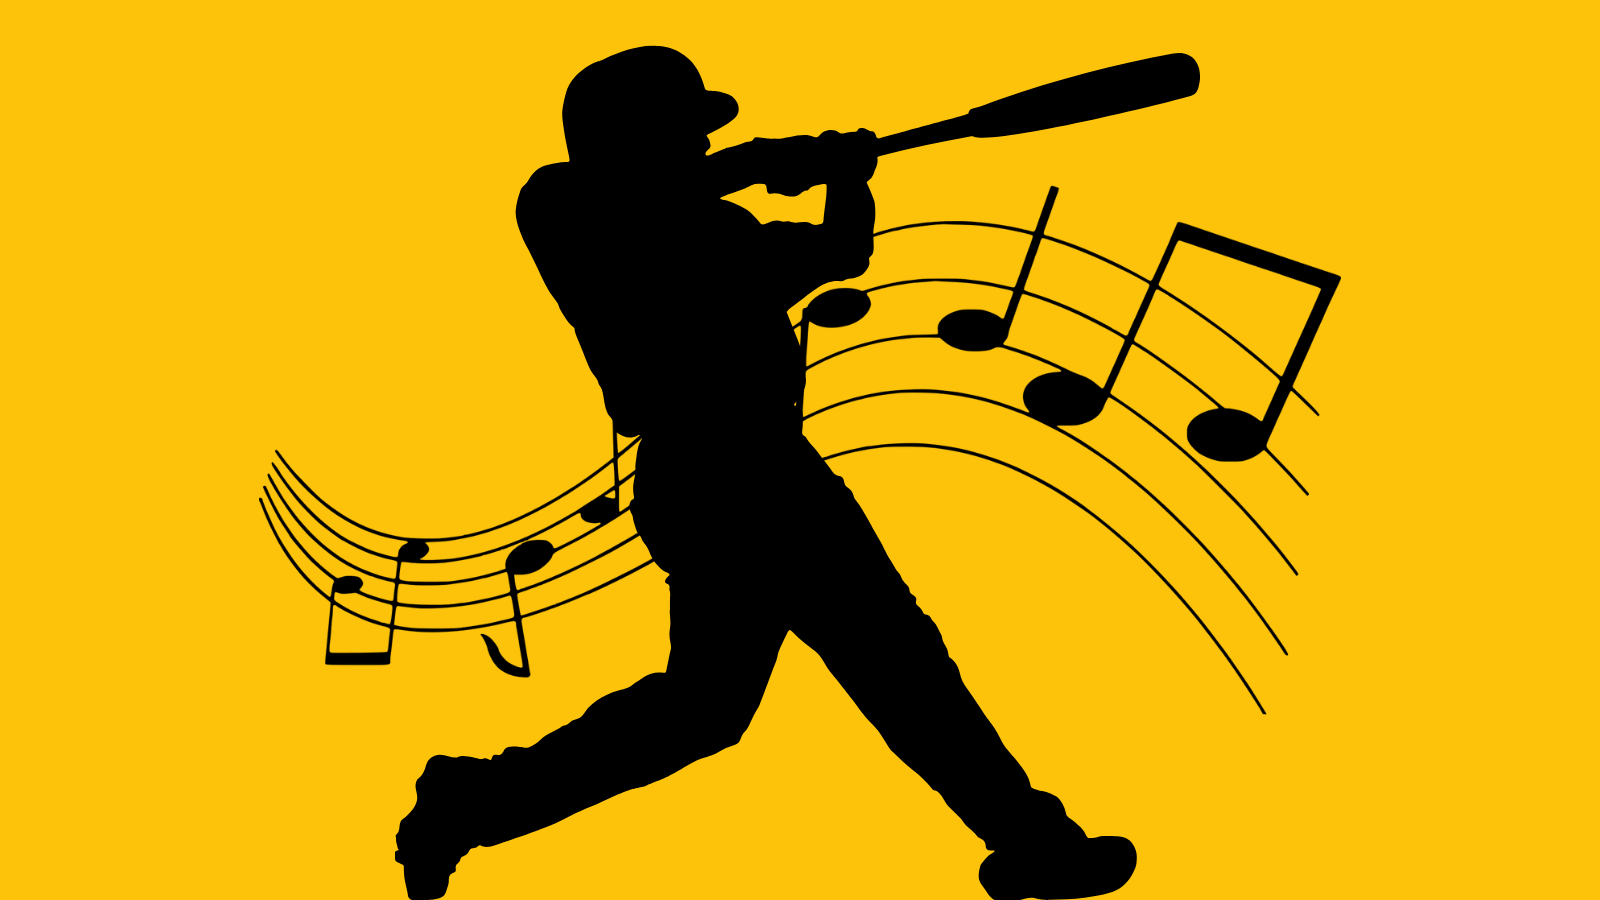 The best walk up songs for baseball players by Joker Mag – the home of the underdog